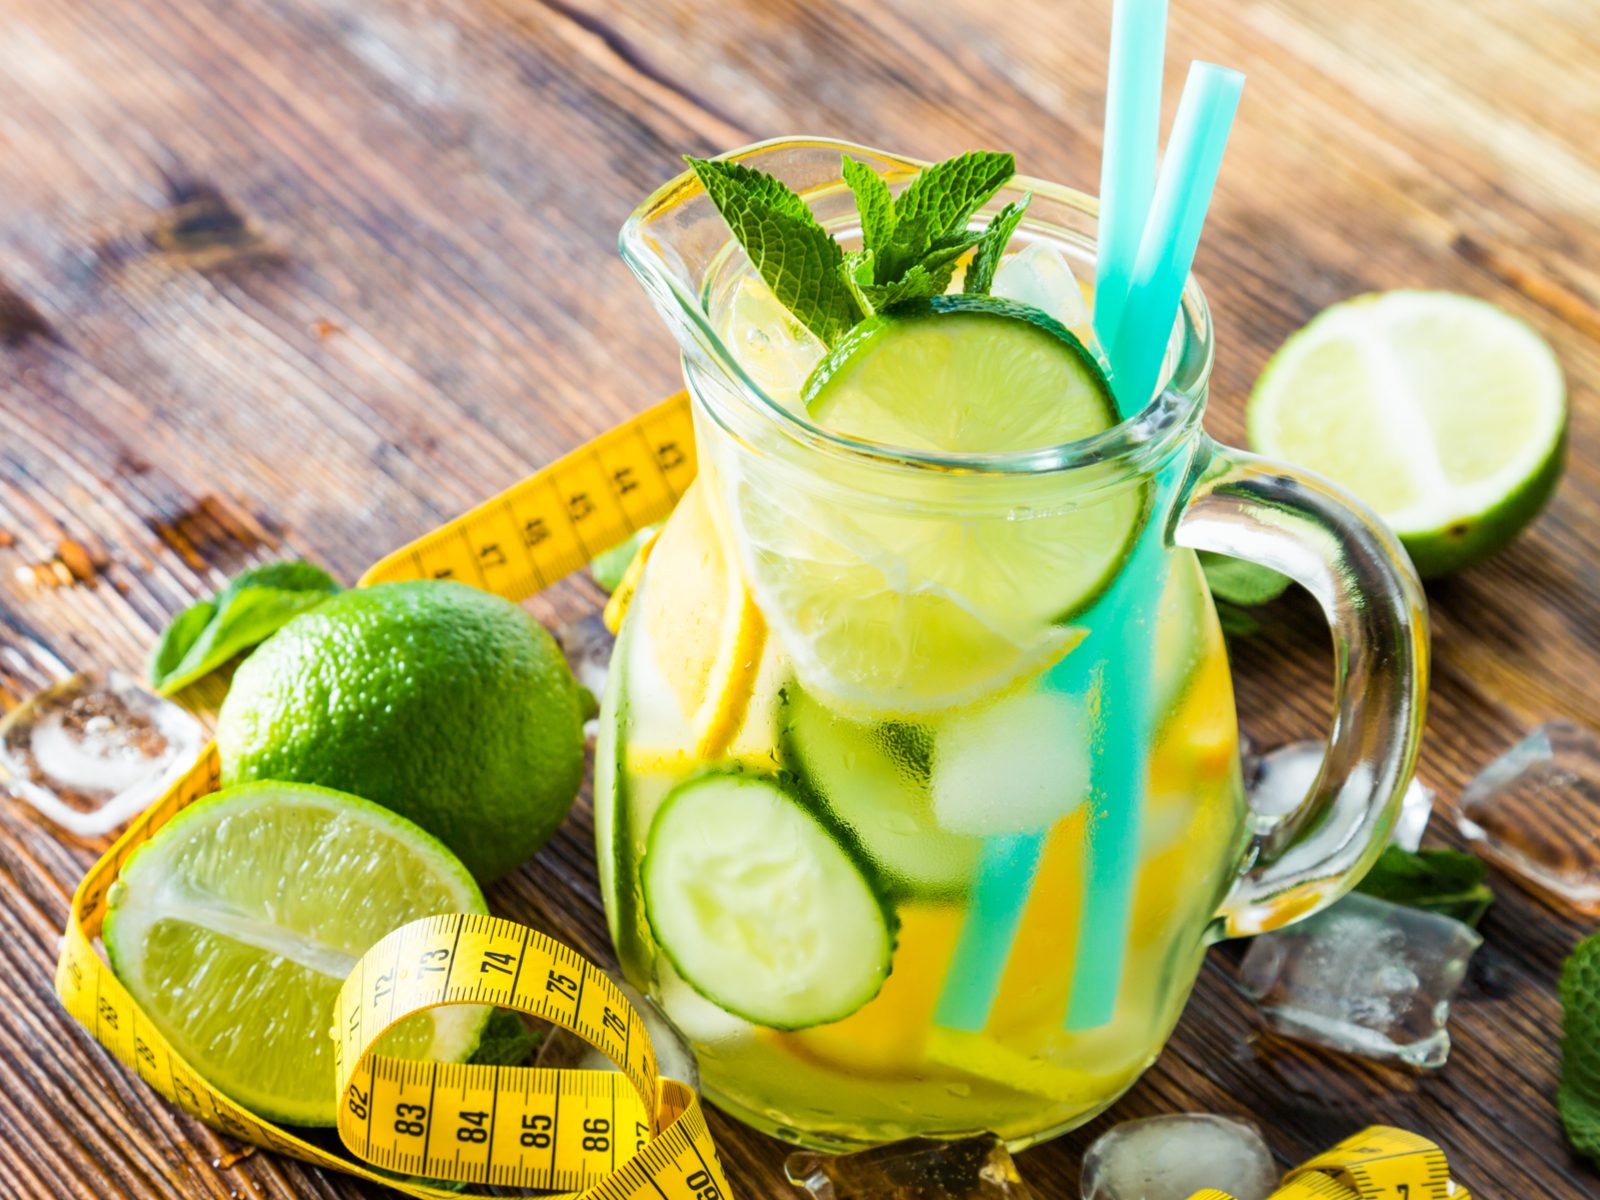 Detox drinks: Myths and facts